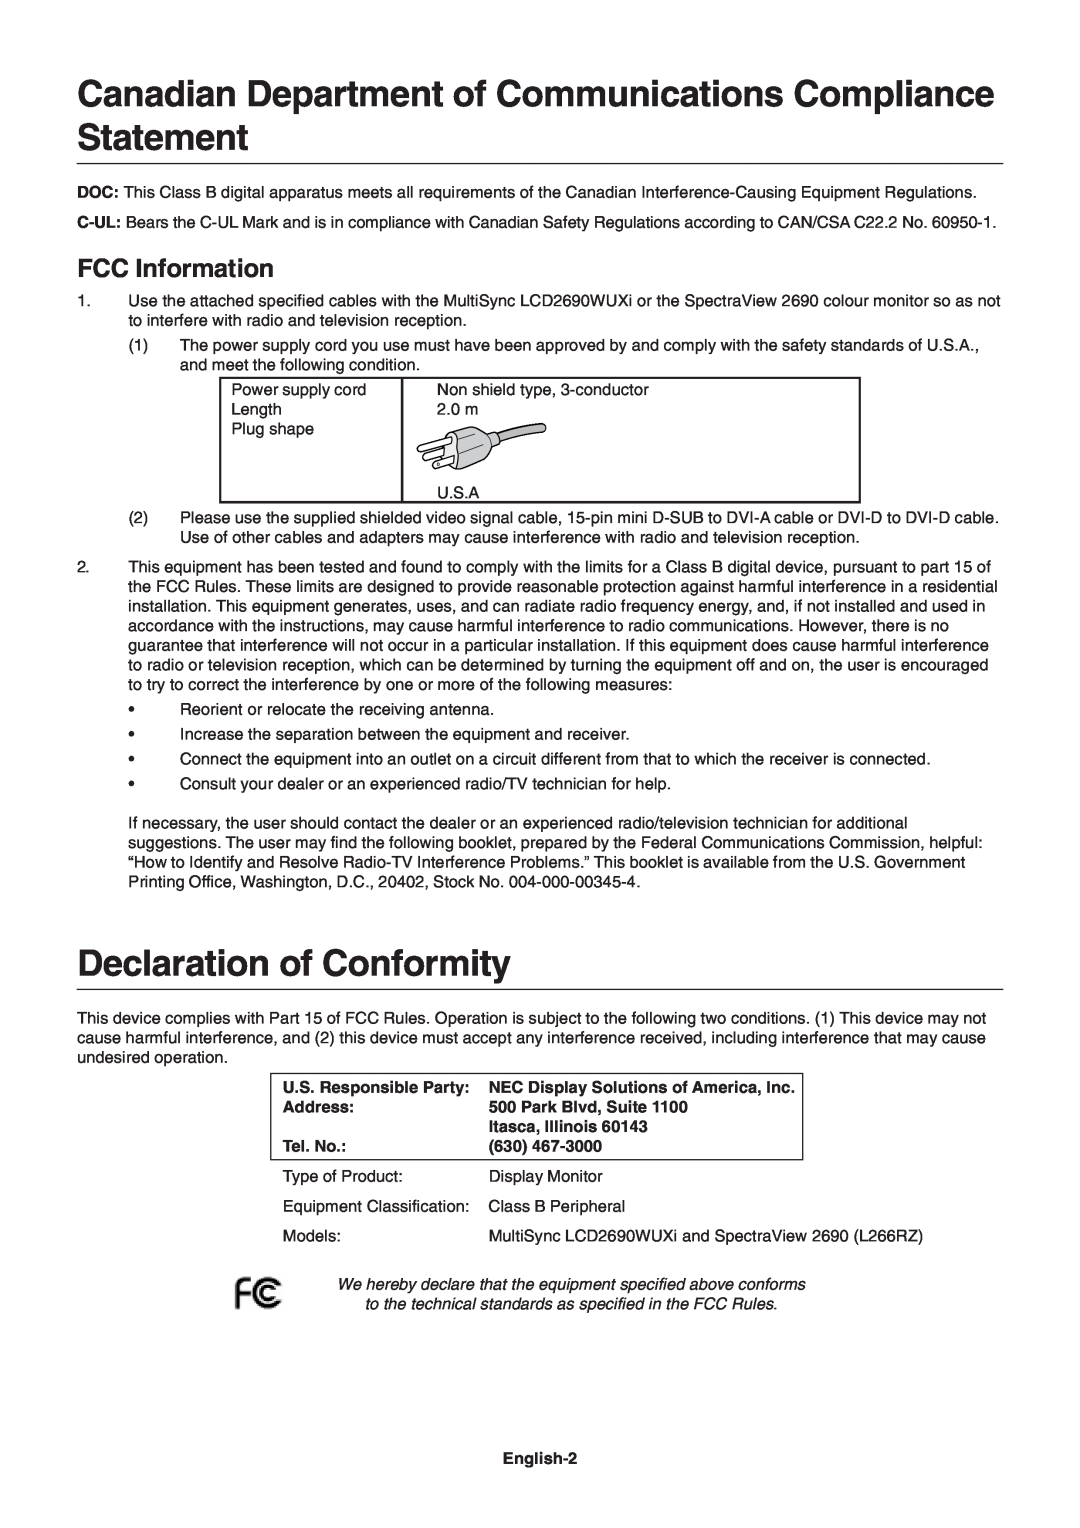 NEC LCD2690WUXi Canadian Department of Communications Compliance Statement, Declaration of Conformity, FCC Information 